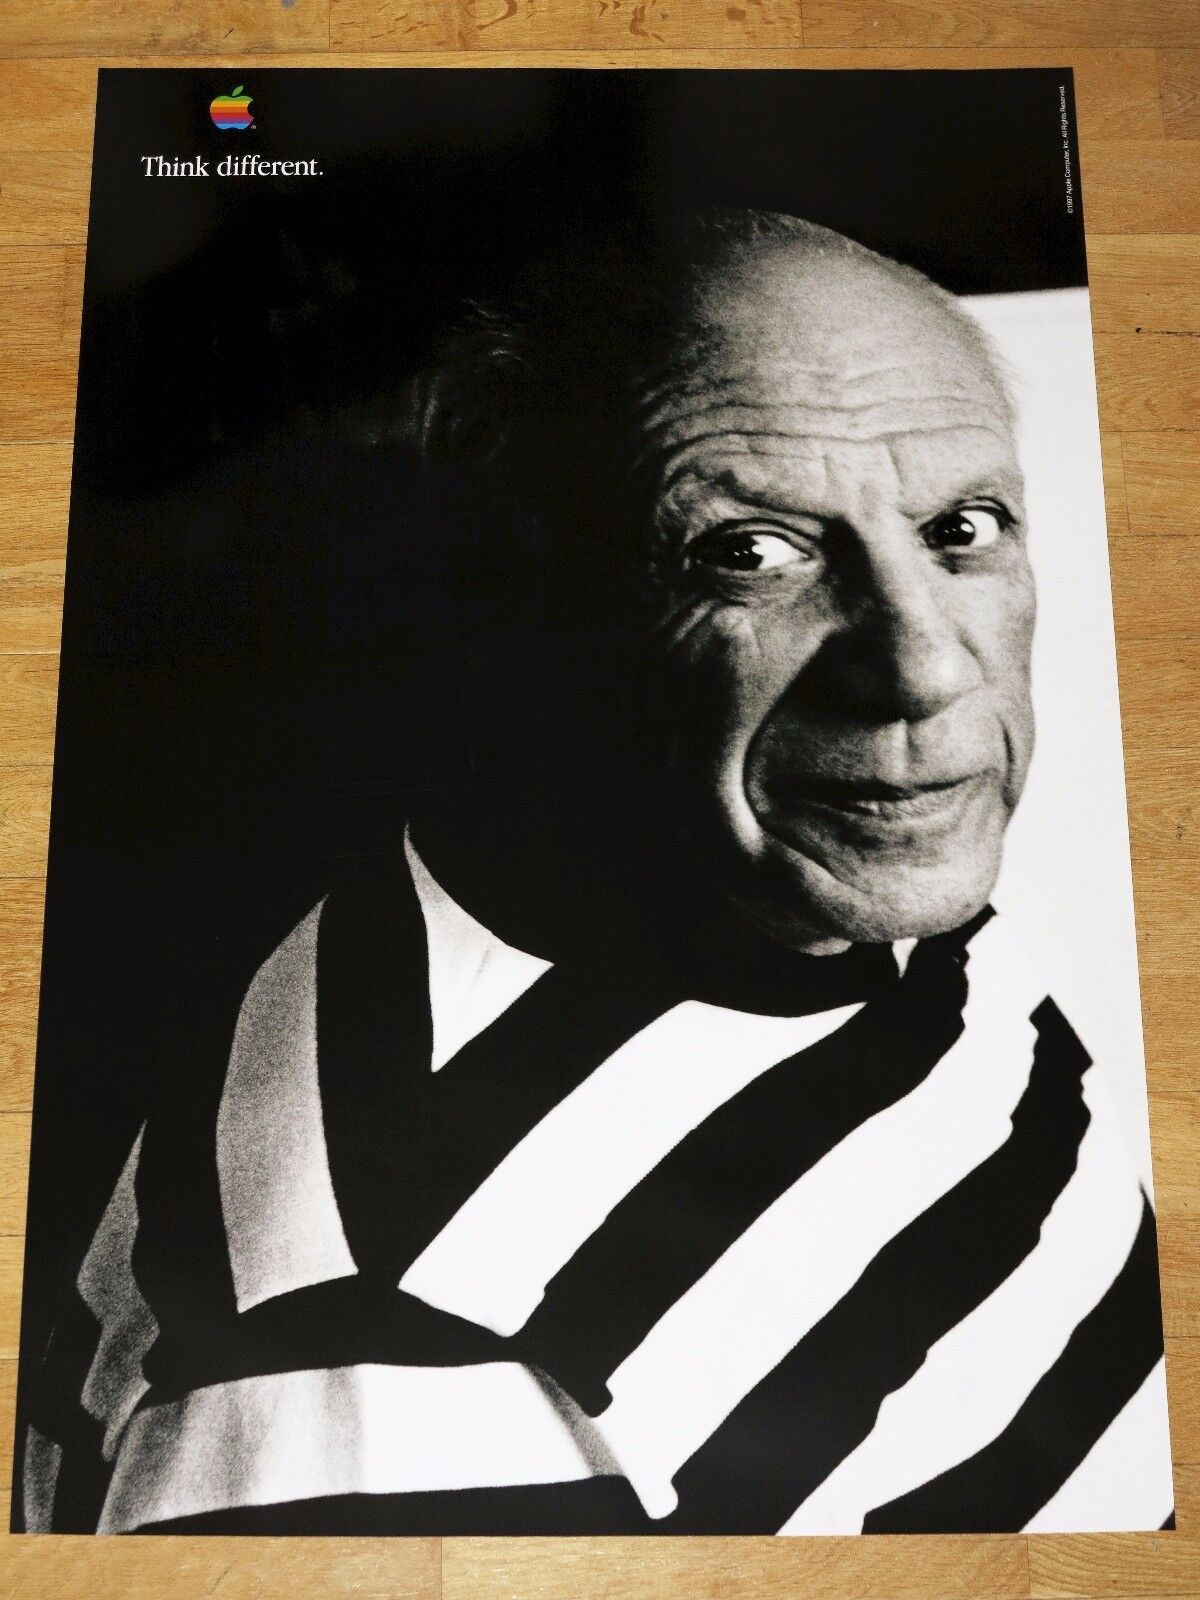 APPLE THINK DIFFERENT POSTER - PABLO PICASSO 2 / 24 x 36 by STEVE JOBS 61 x 91cm